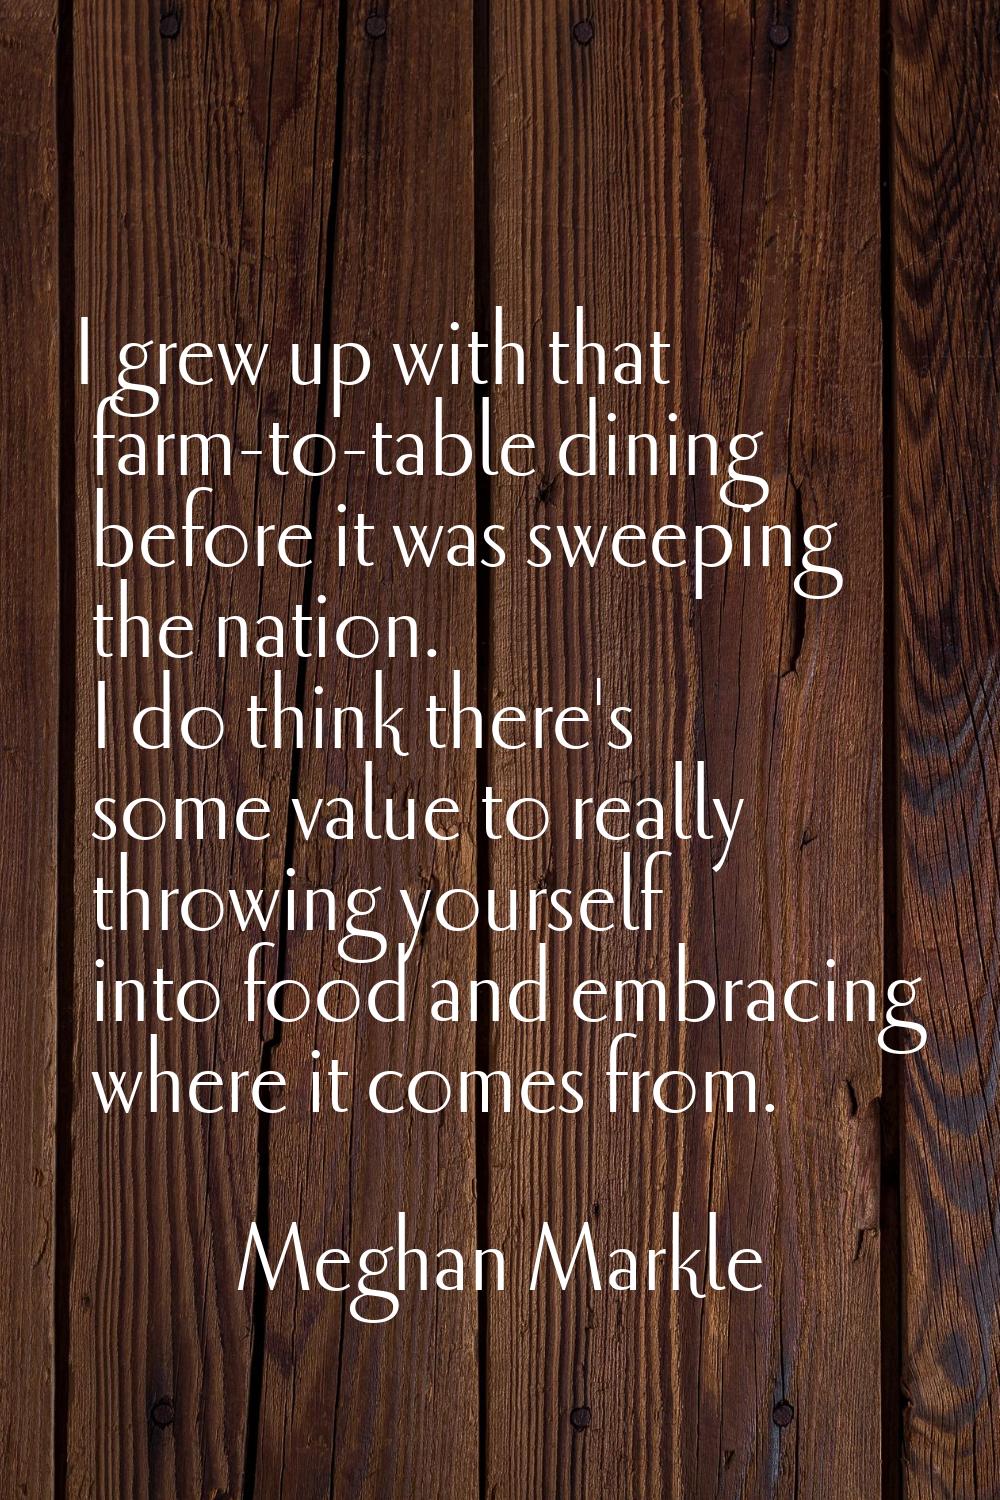 I grew up with that farm-to-table dining before it was sweeping the nation. I do think there's some